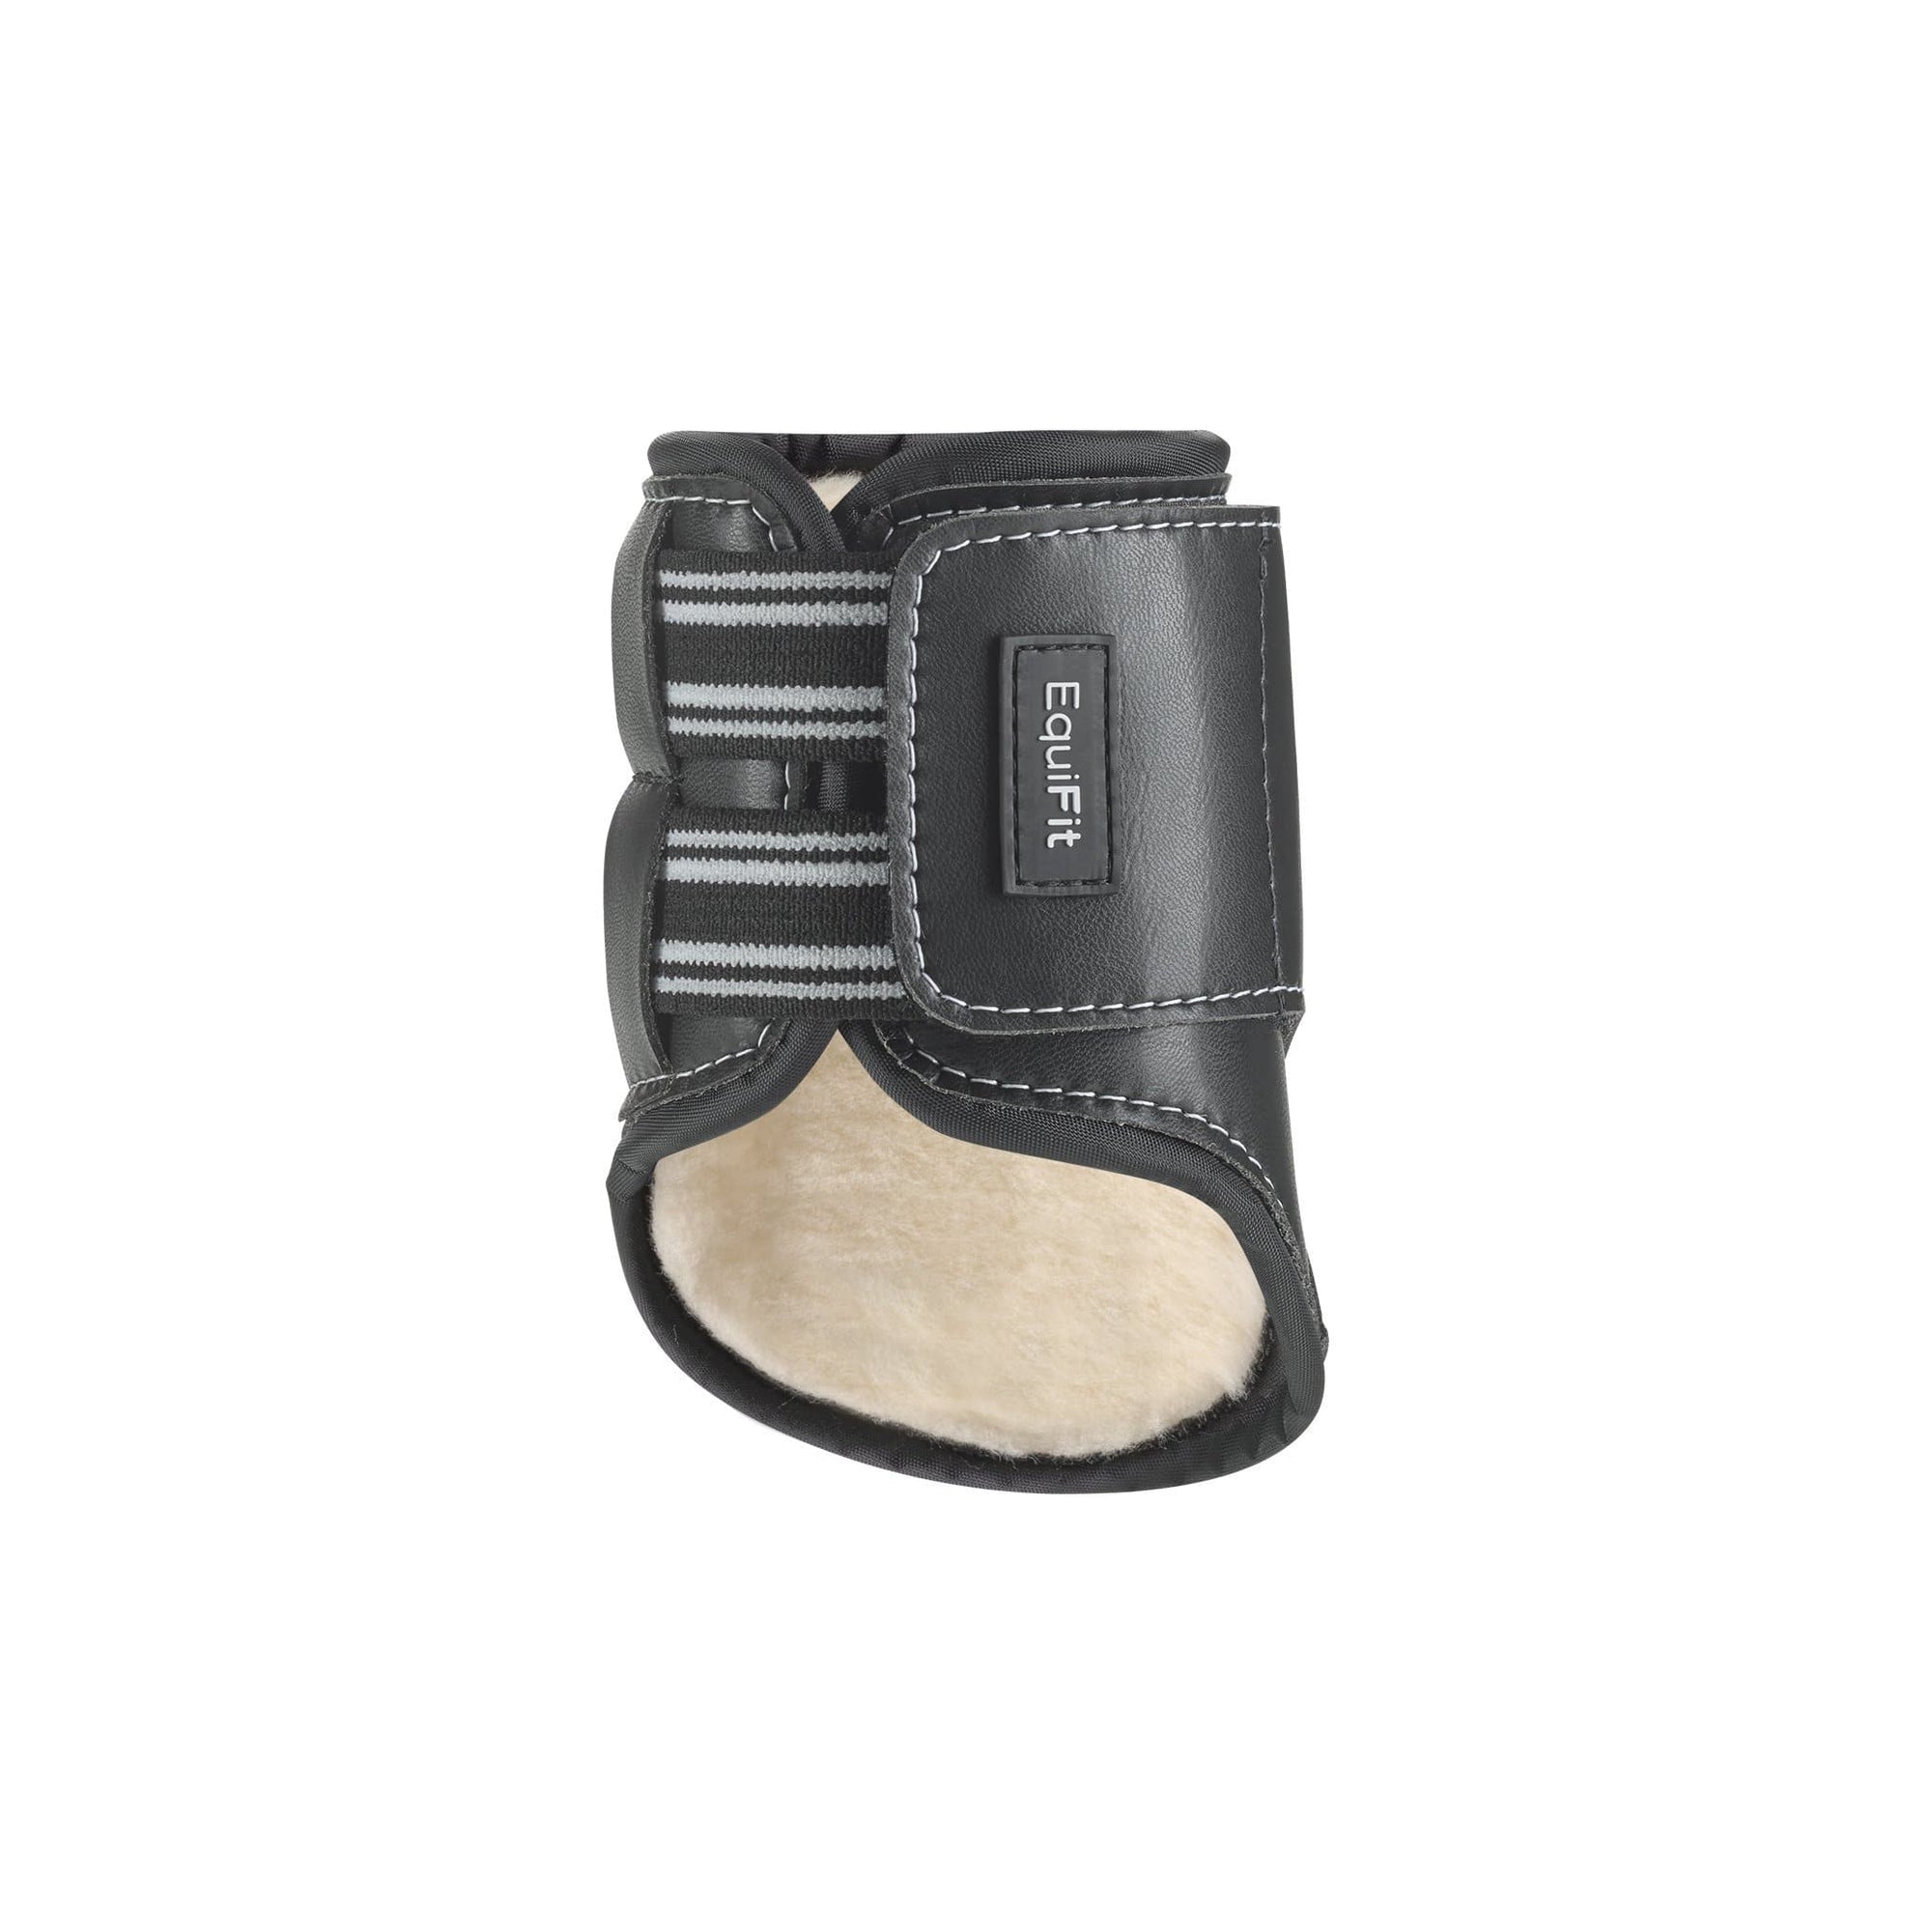 MultiTeq Hind Boot with SheepsWool ImpacTeq Liner offers Full Coverage Protection, perfect for daily turnout and exercise